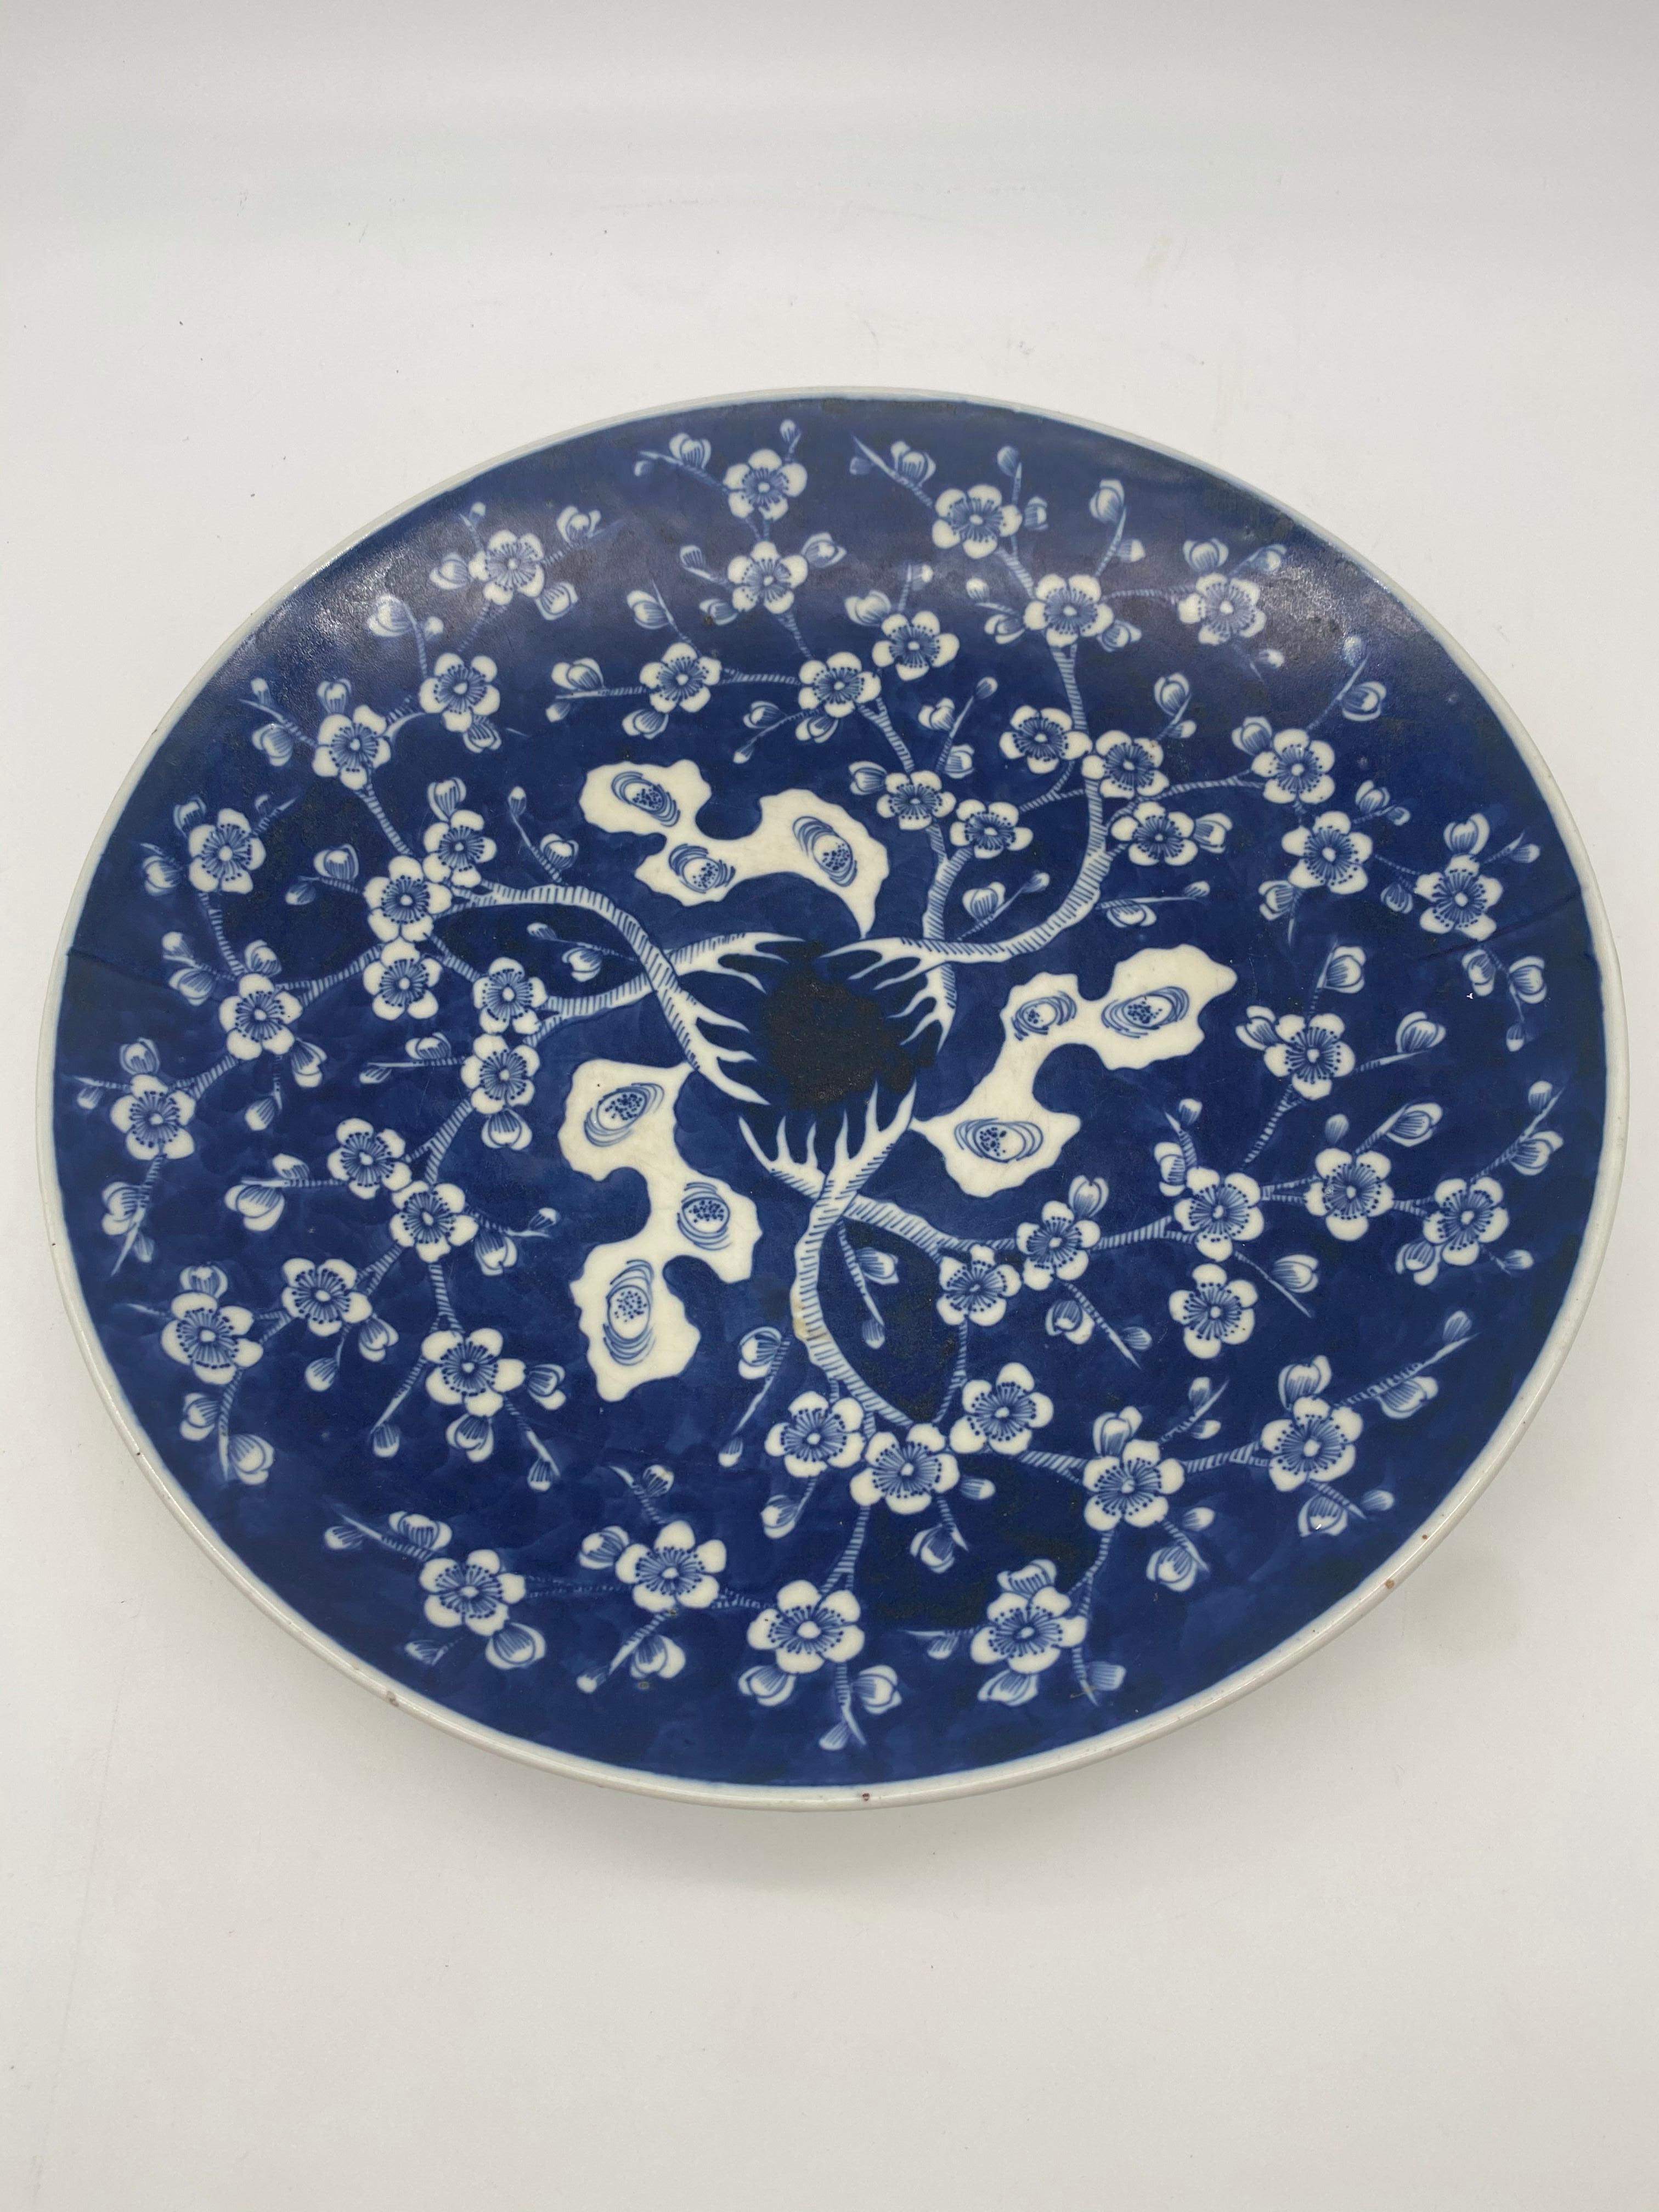 19th century blue and white Japanese porcelain dish Meiji period decorated with prunus on the cobalt blue ground, inscription to base, Ex Bonhams lot 268 diameter 12 inch.